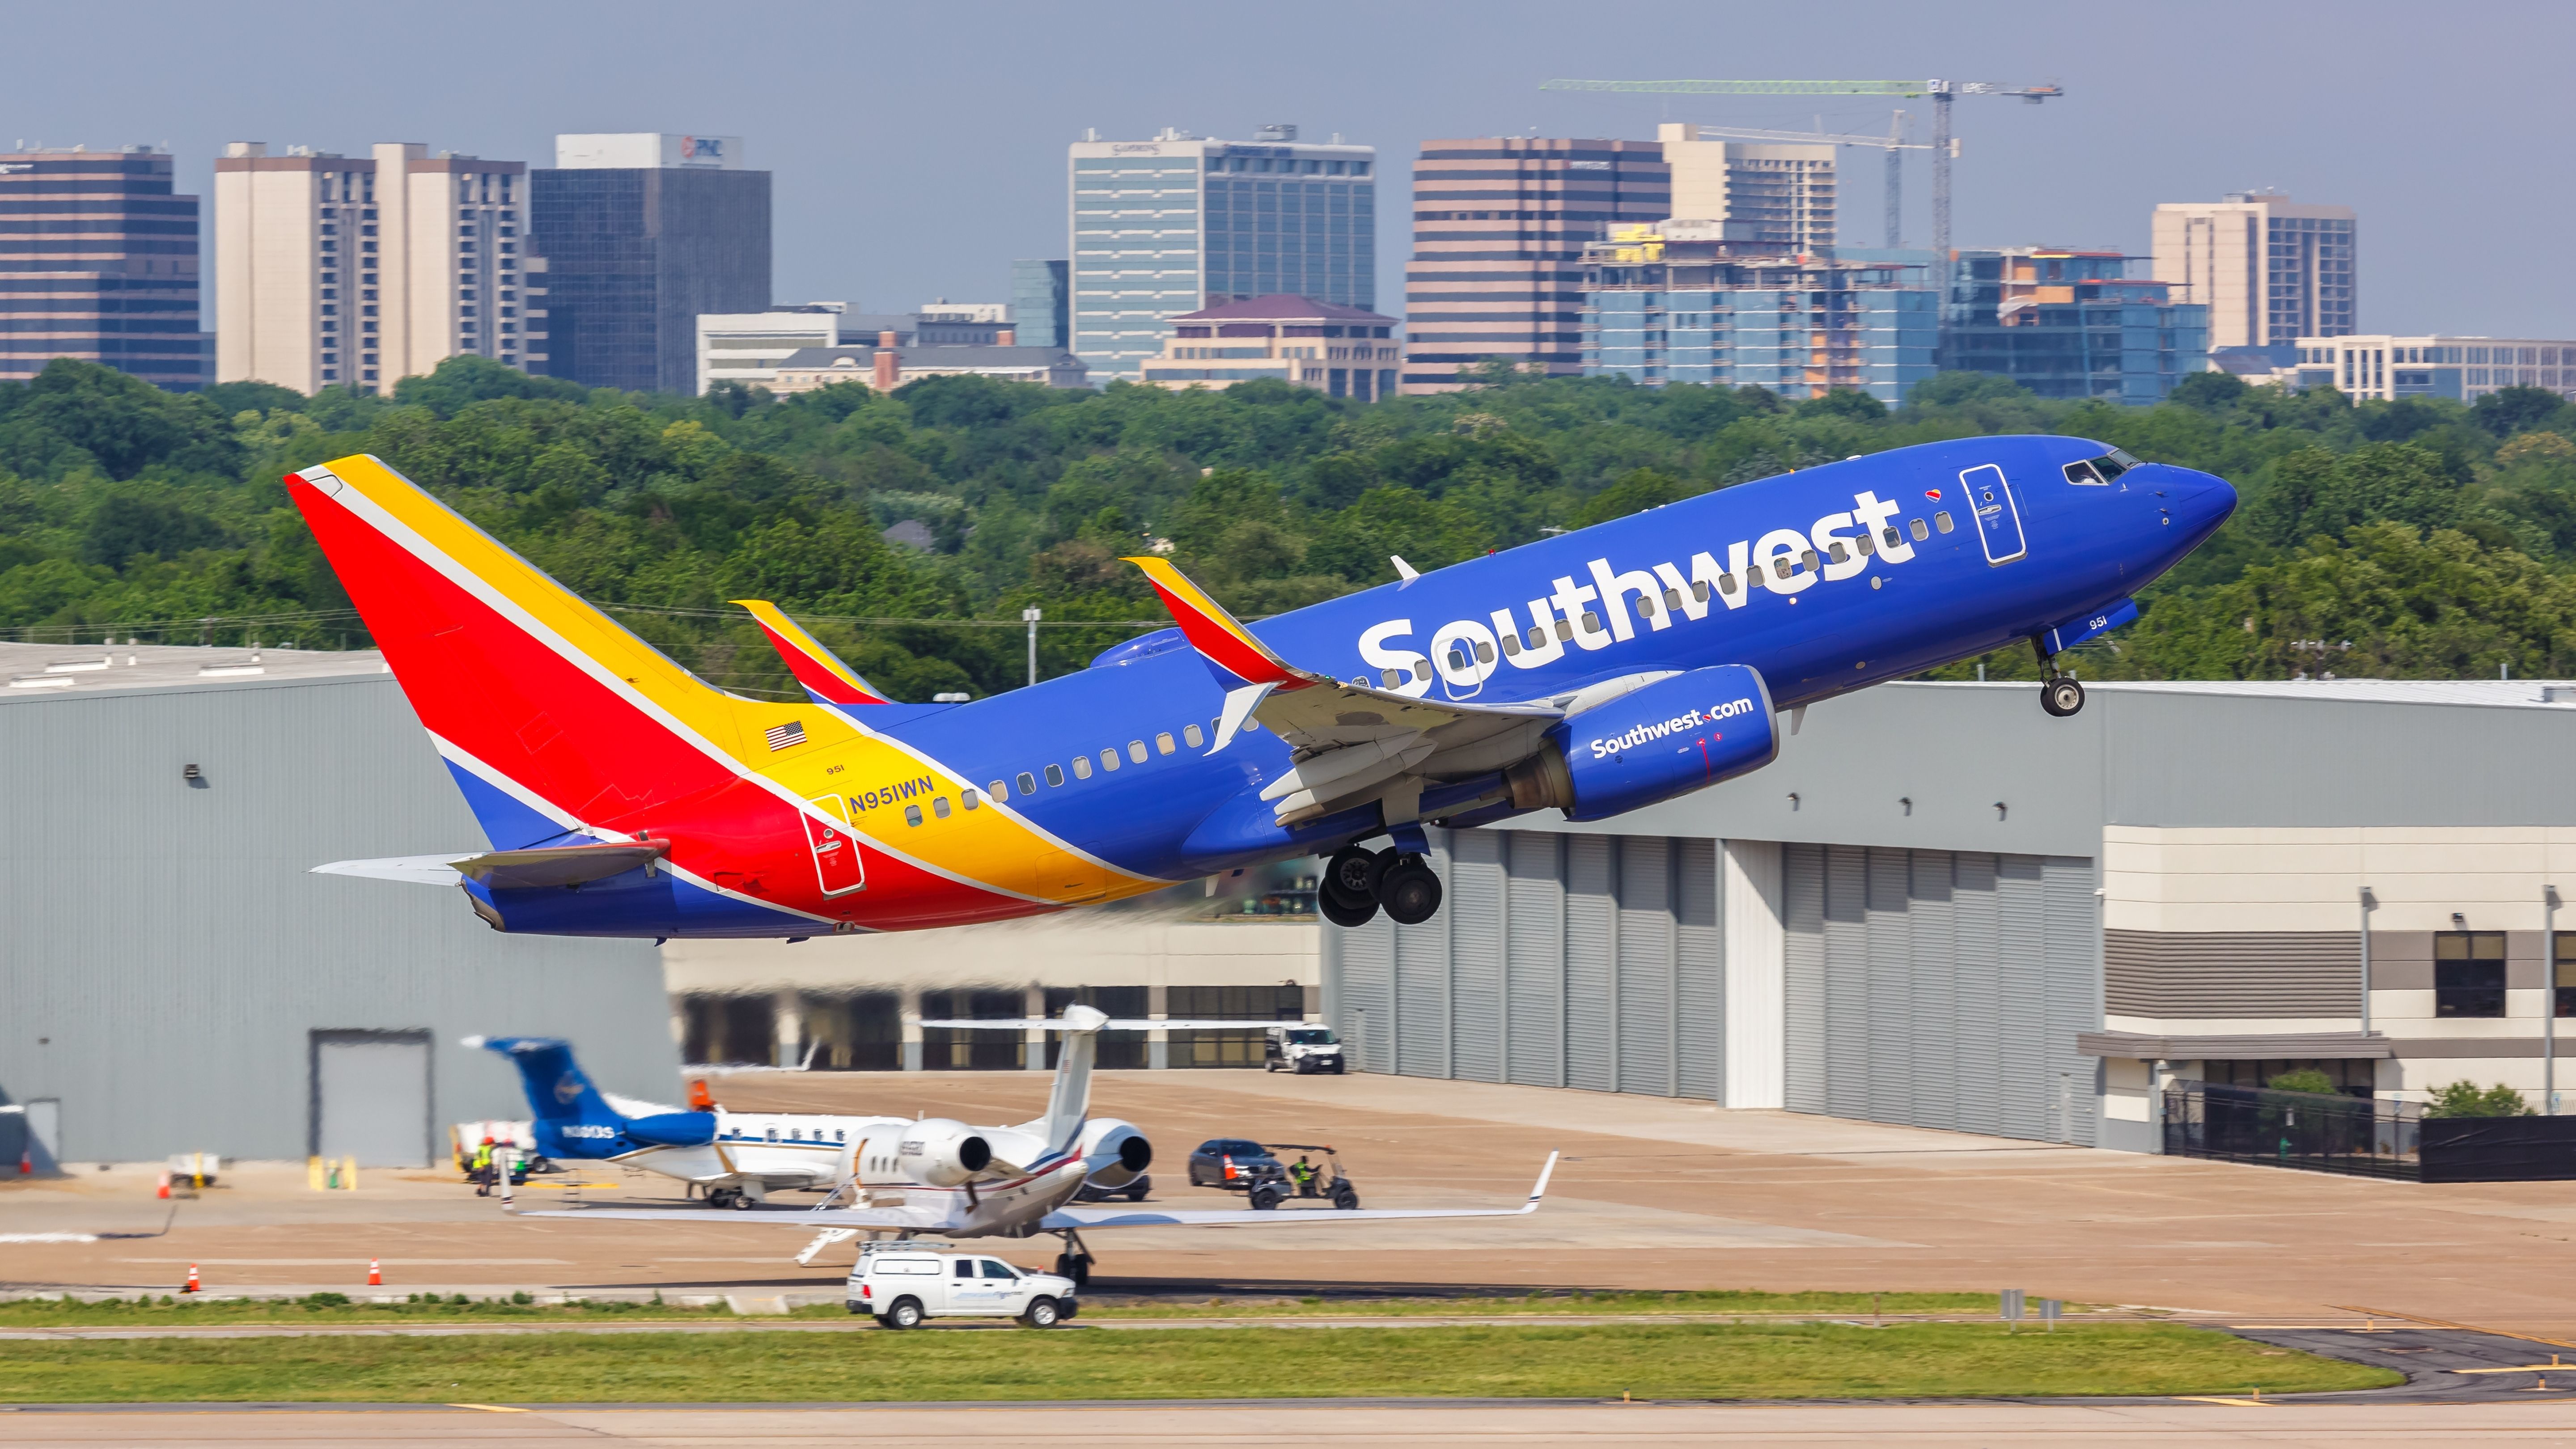 A Southwest aircraft taking off from Dallas Love Field.